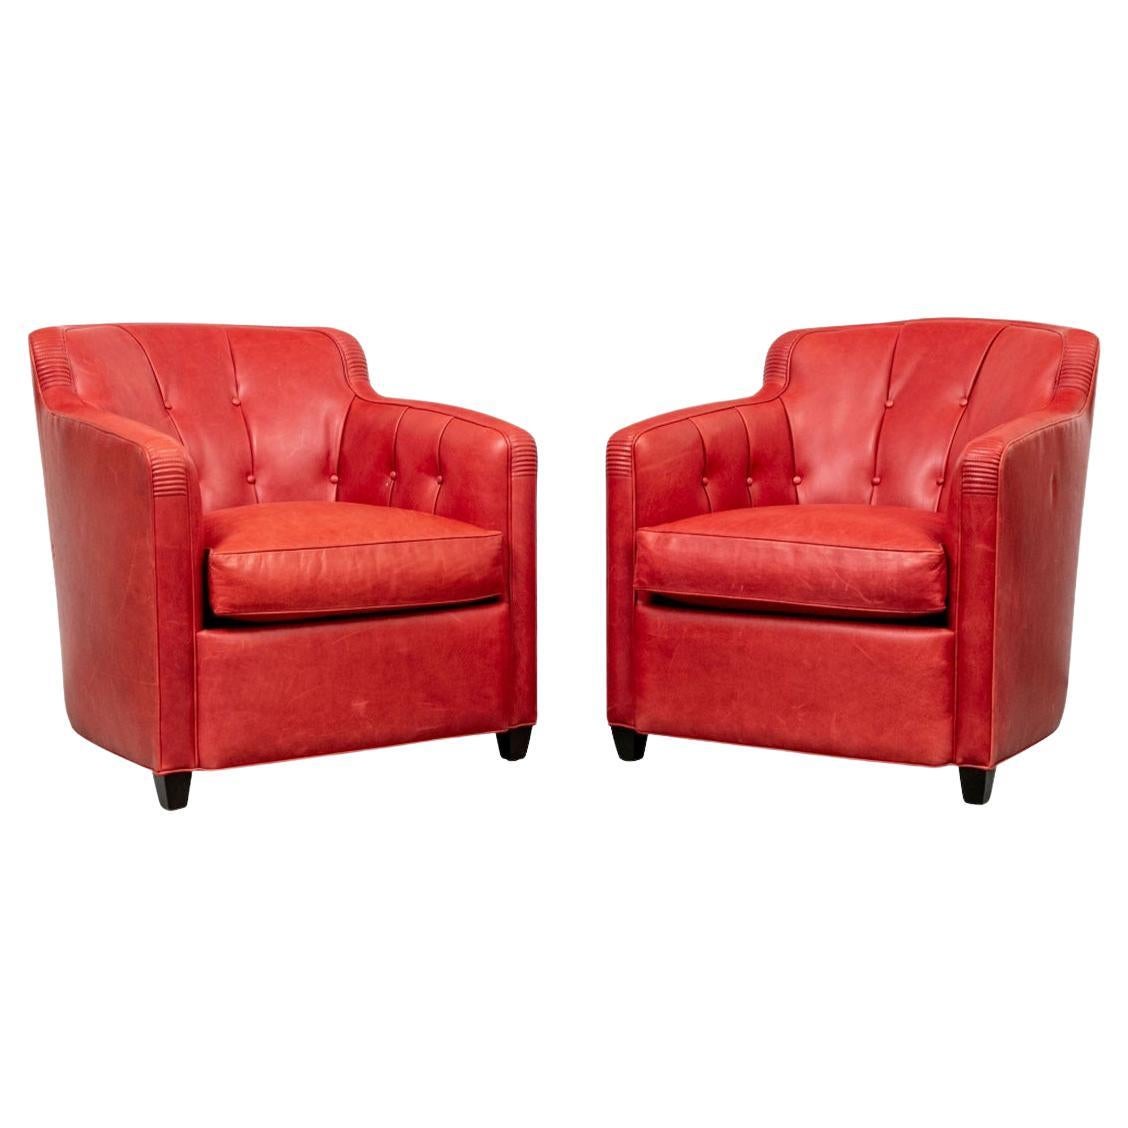 Great Pair of Hancock & Moore Red Leather Club Chairs